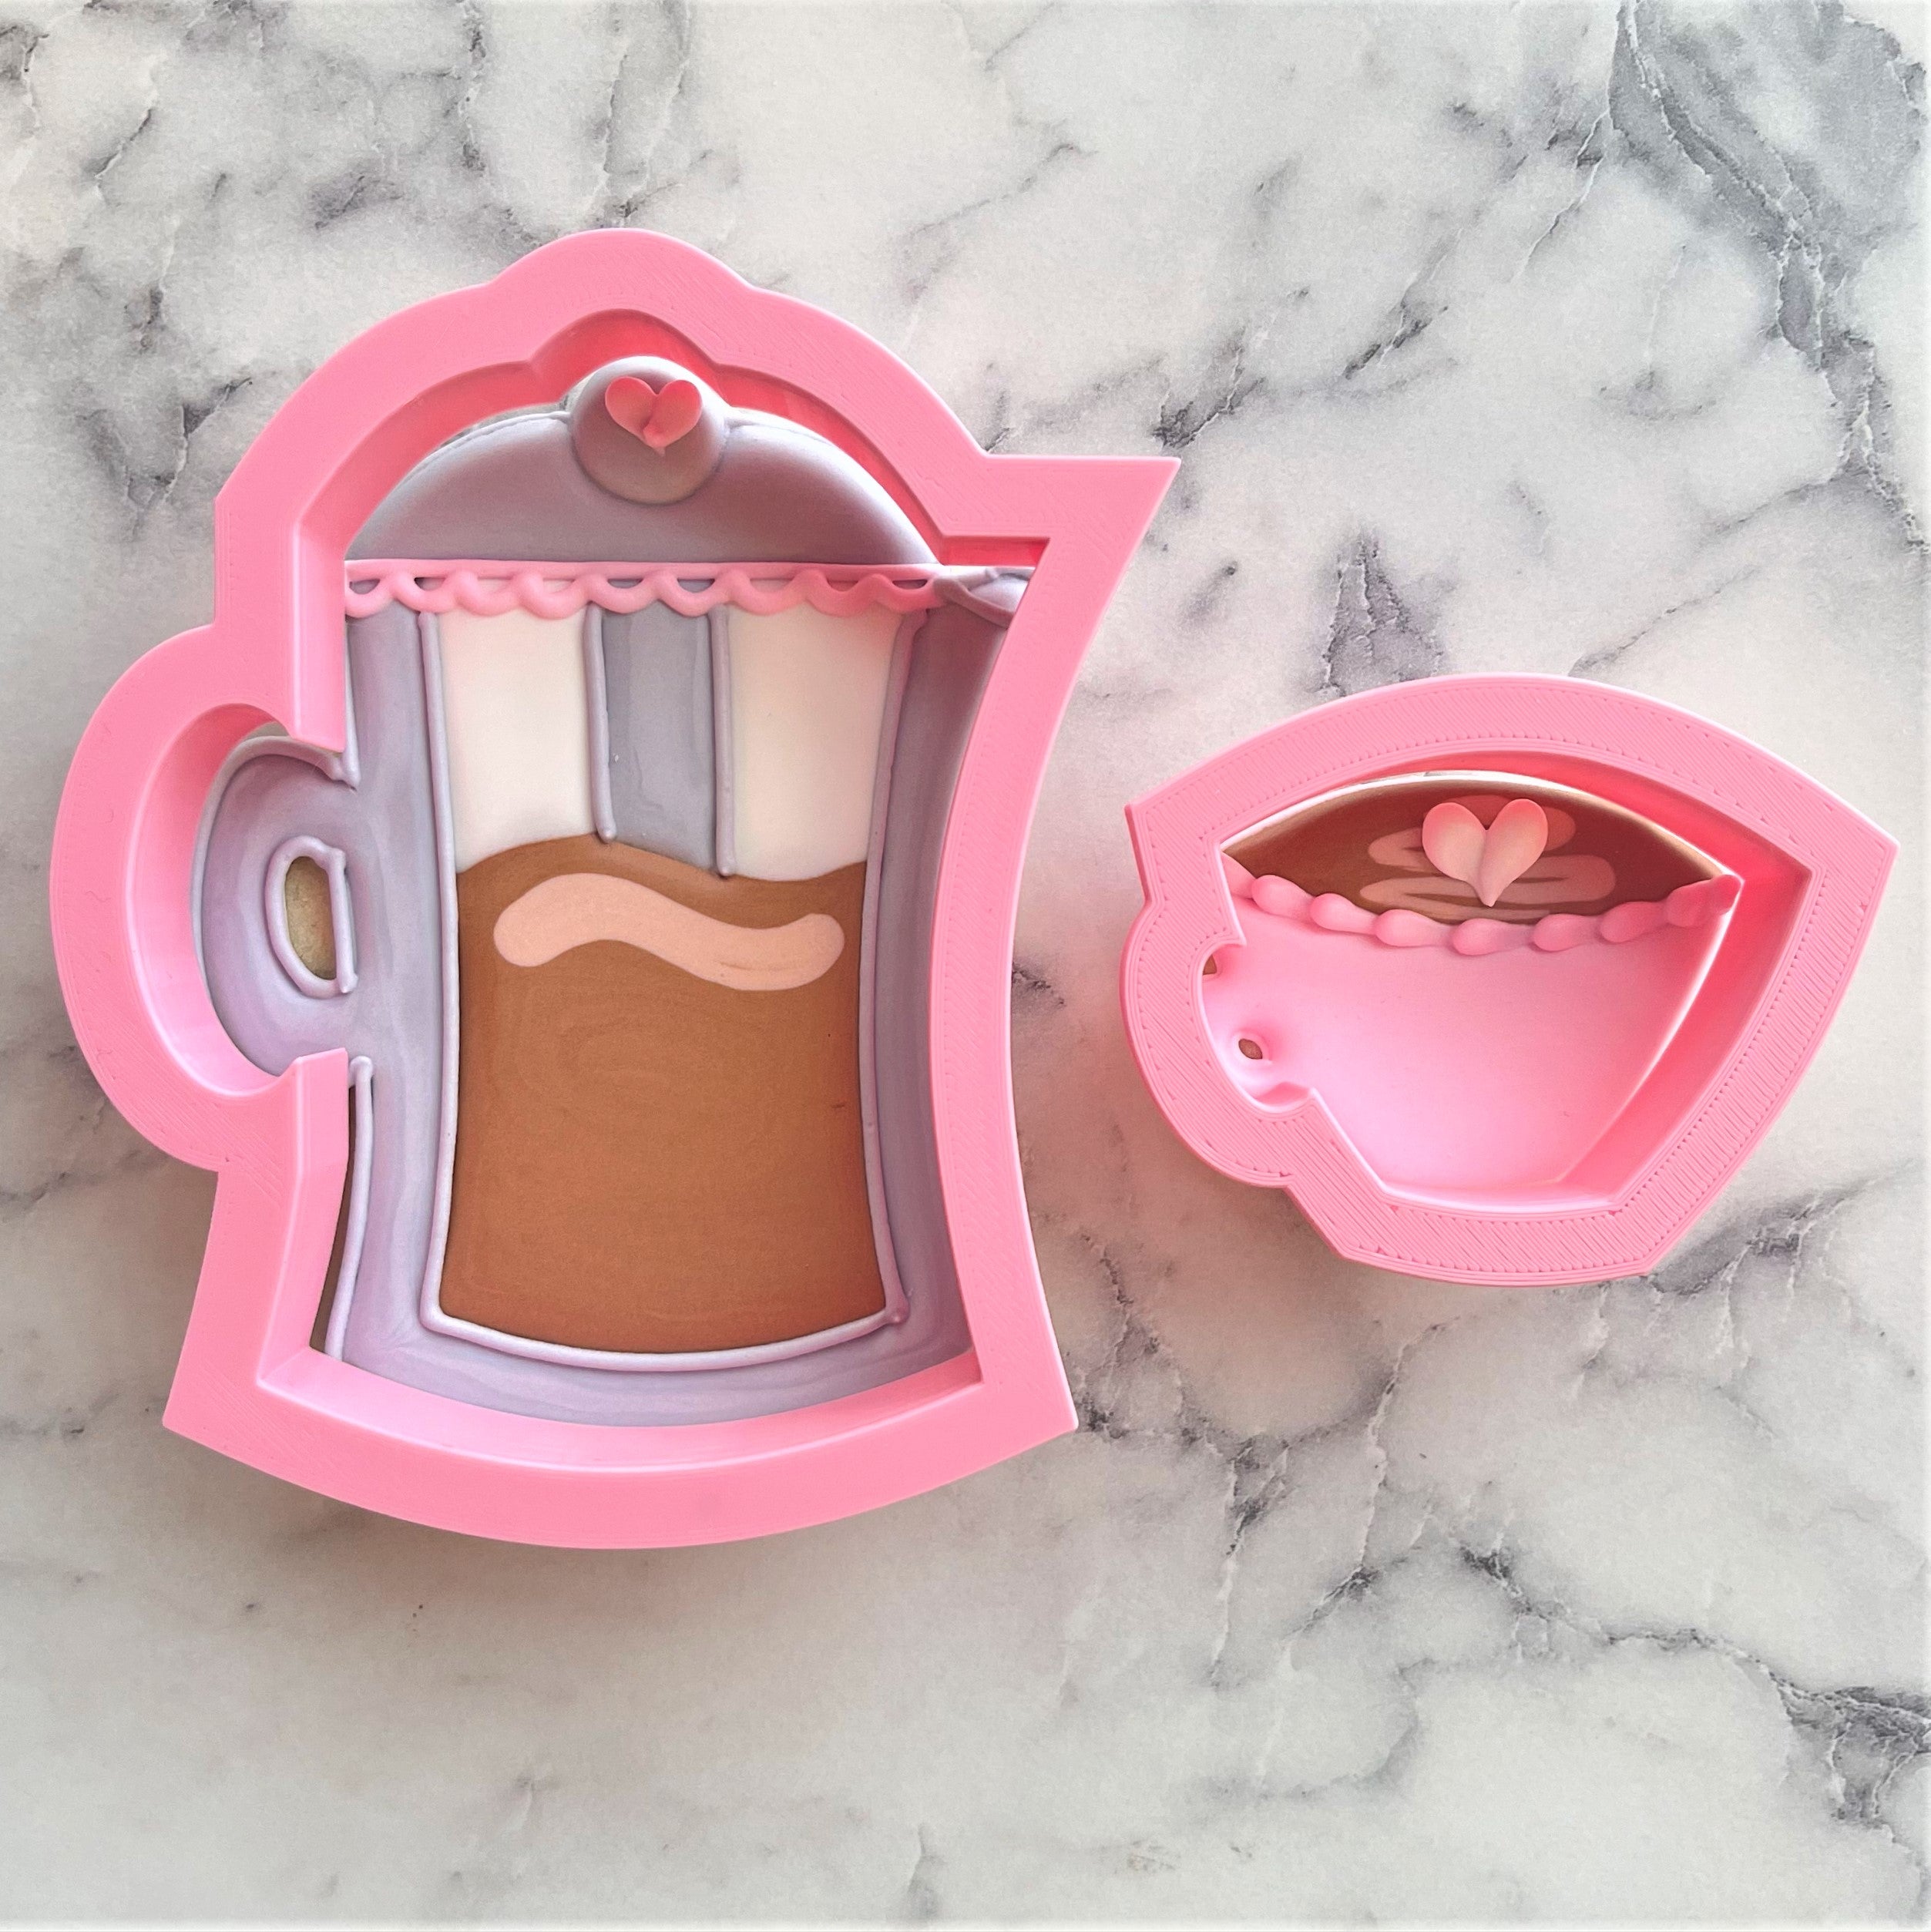 Latte Cup Cookie Cutter by The Flour Box